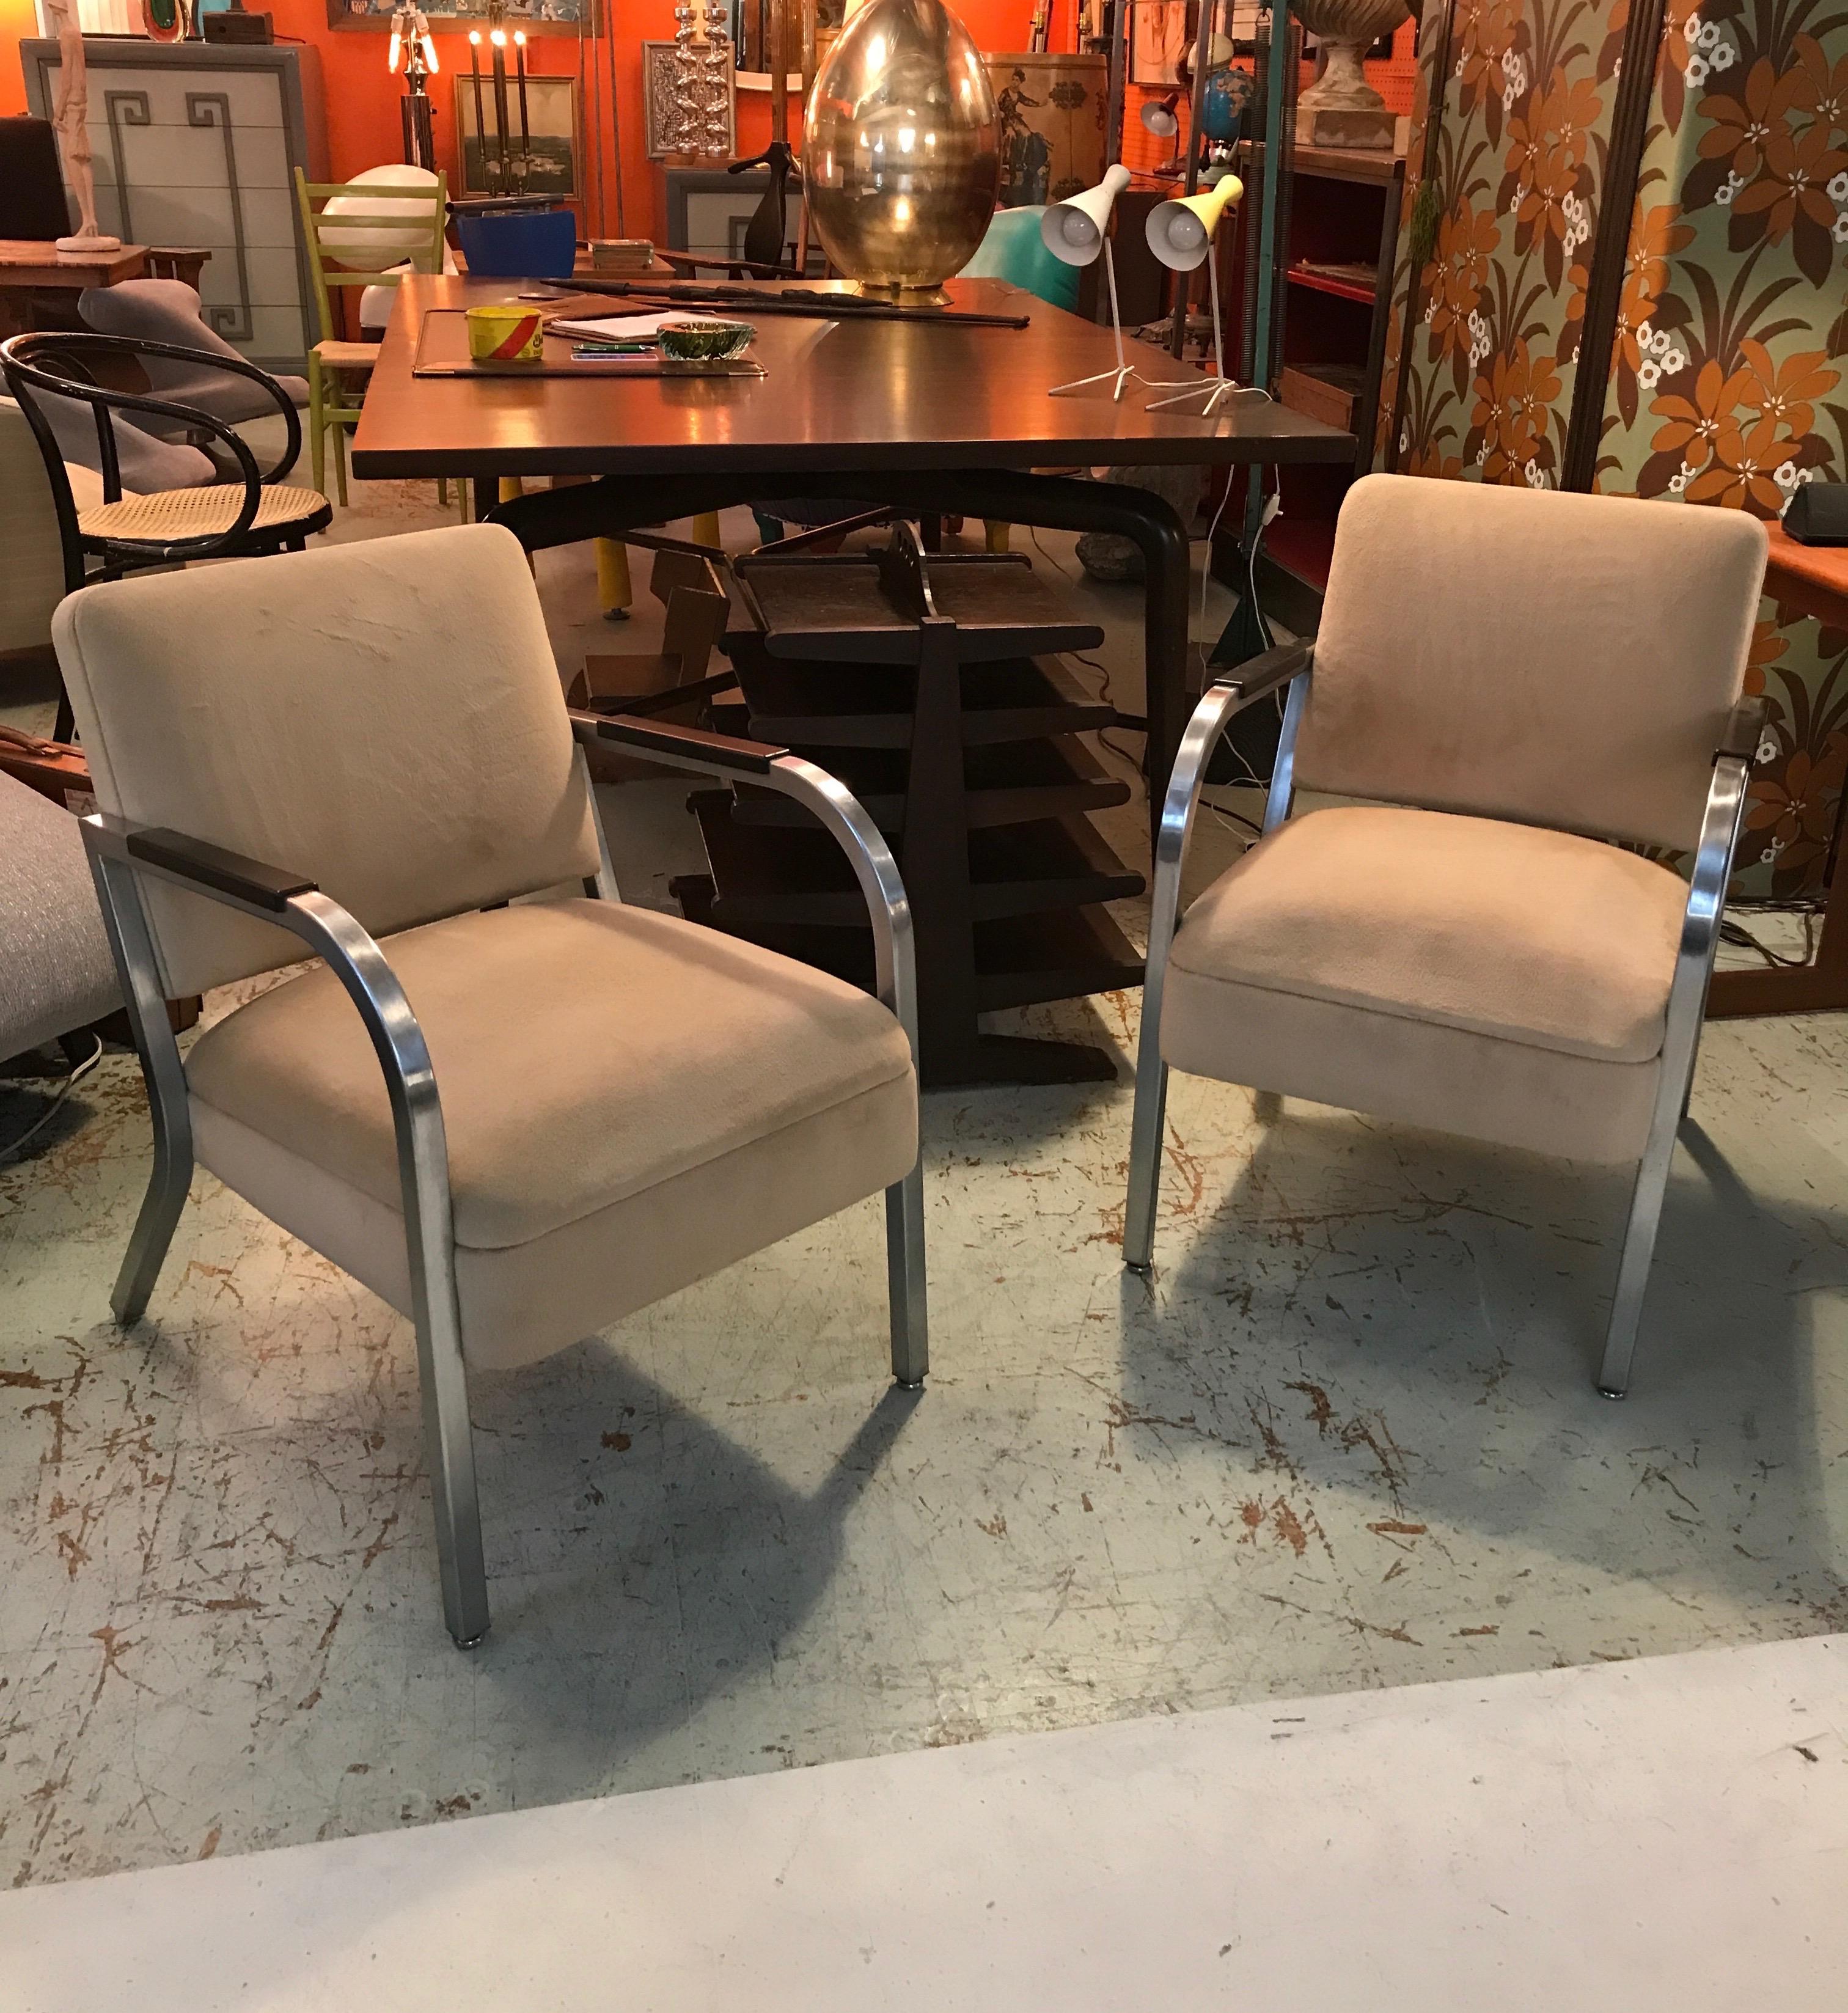 A Pair of Petite Square Tubing 1960's Club Chairs IMO Shaw Walker or Goodform,   9